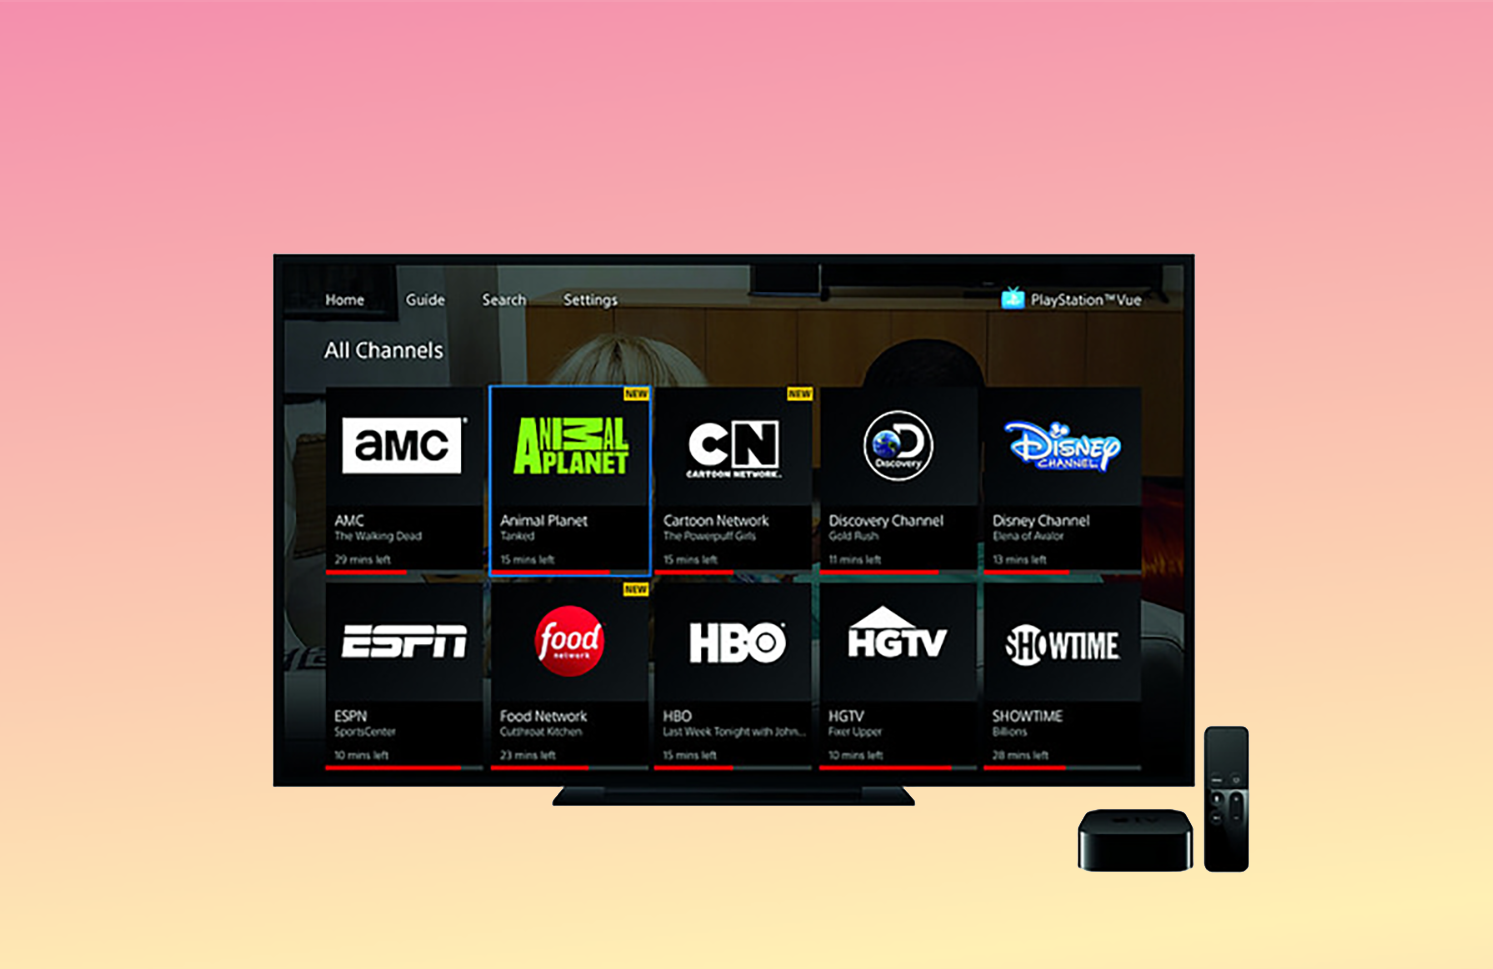 sony brings its playstation vue live tv service to new apple tv image 1